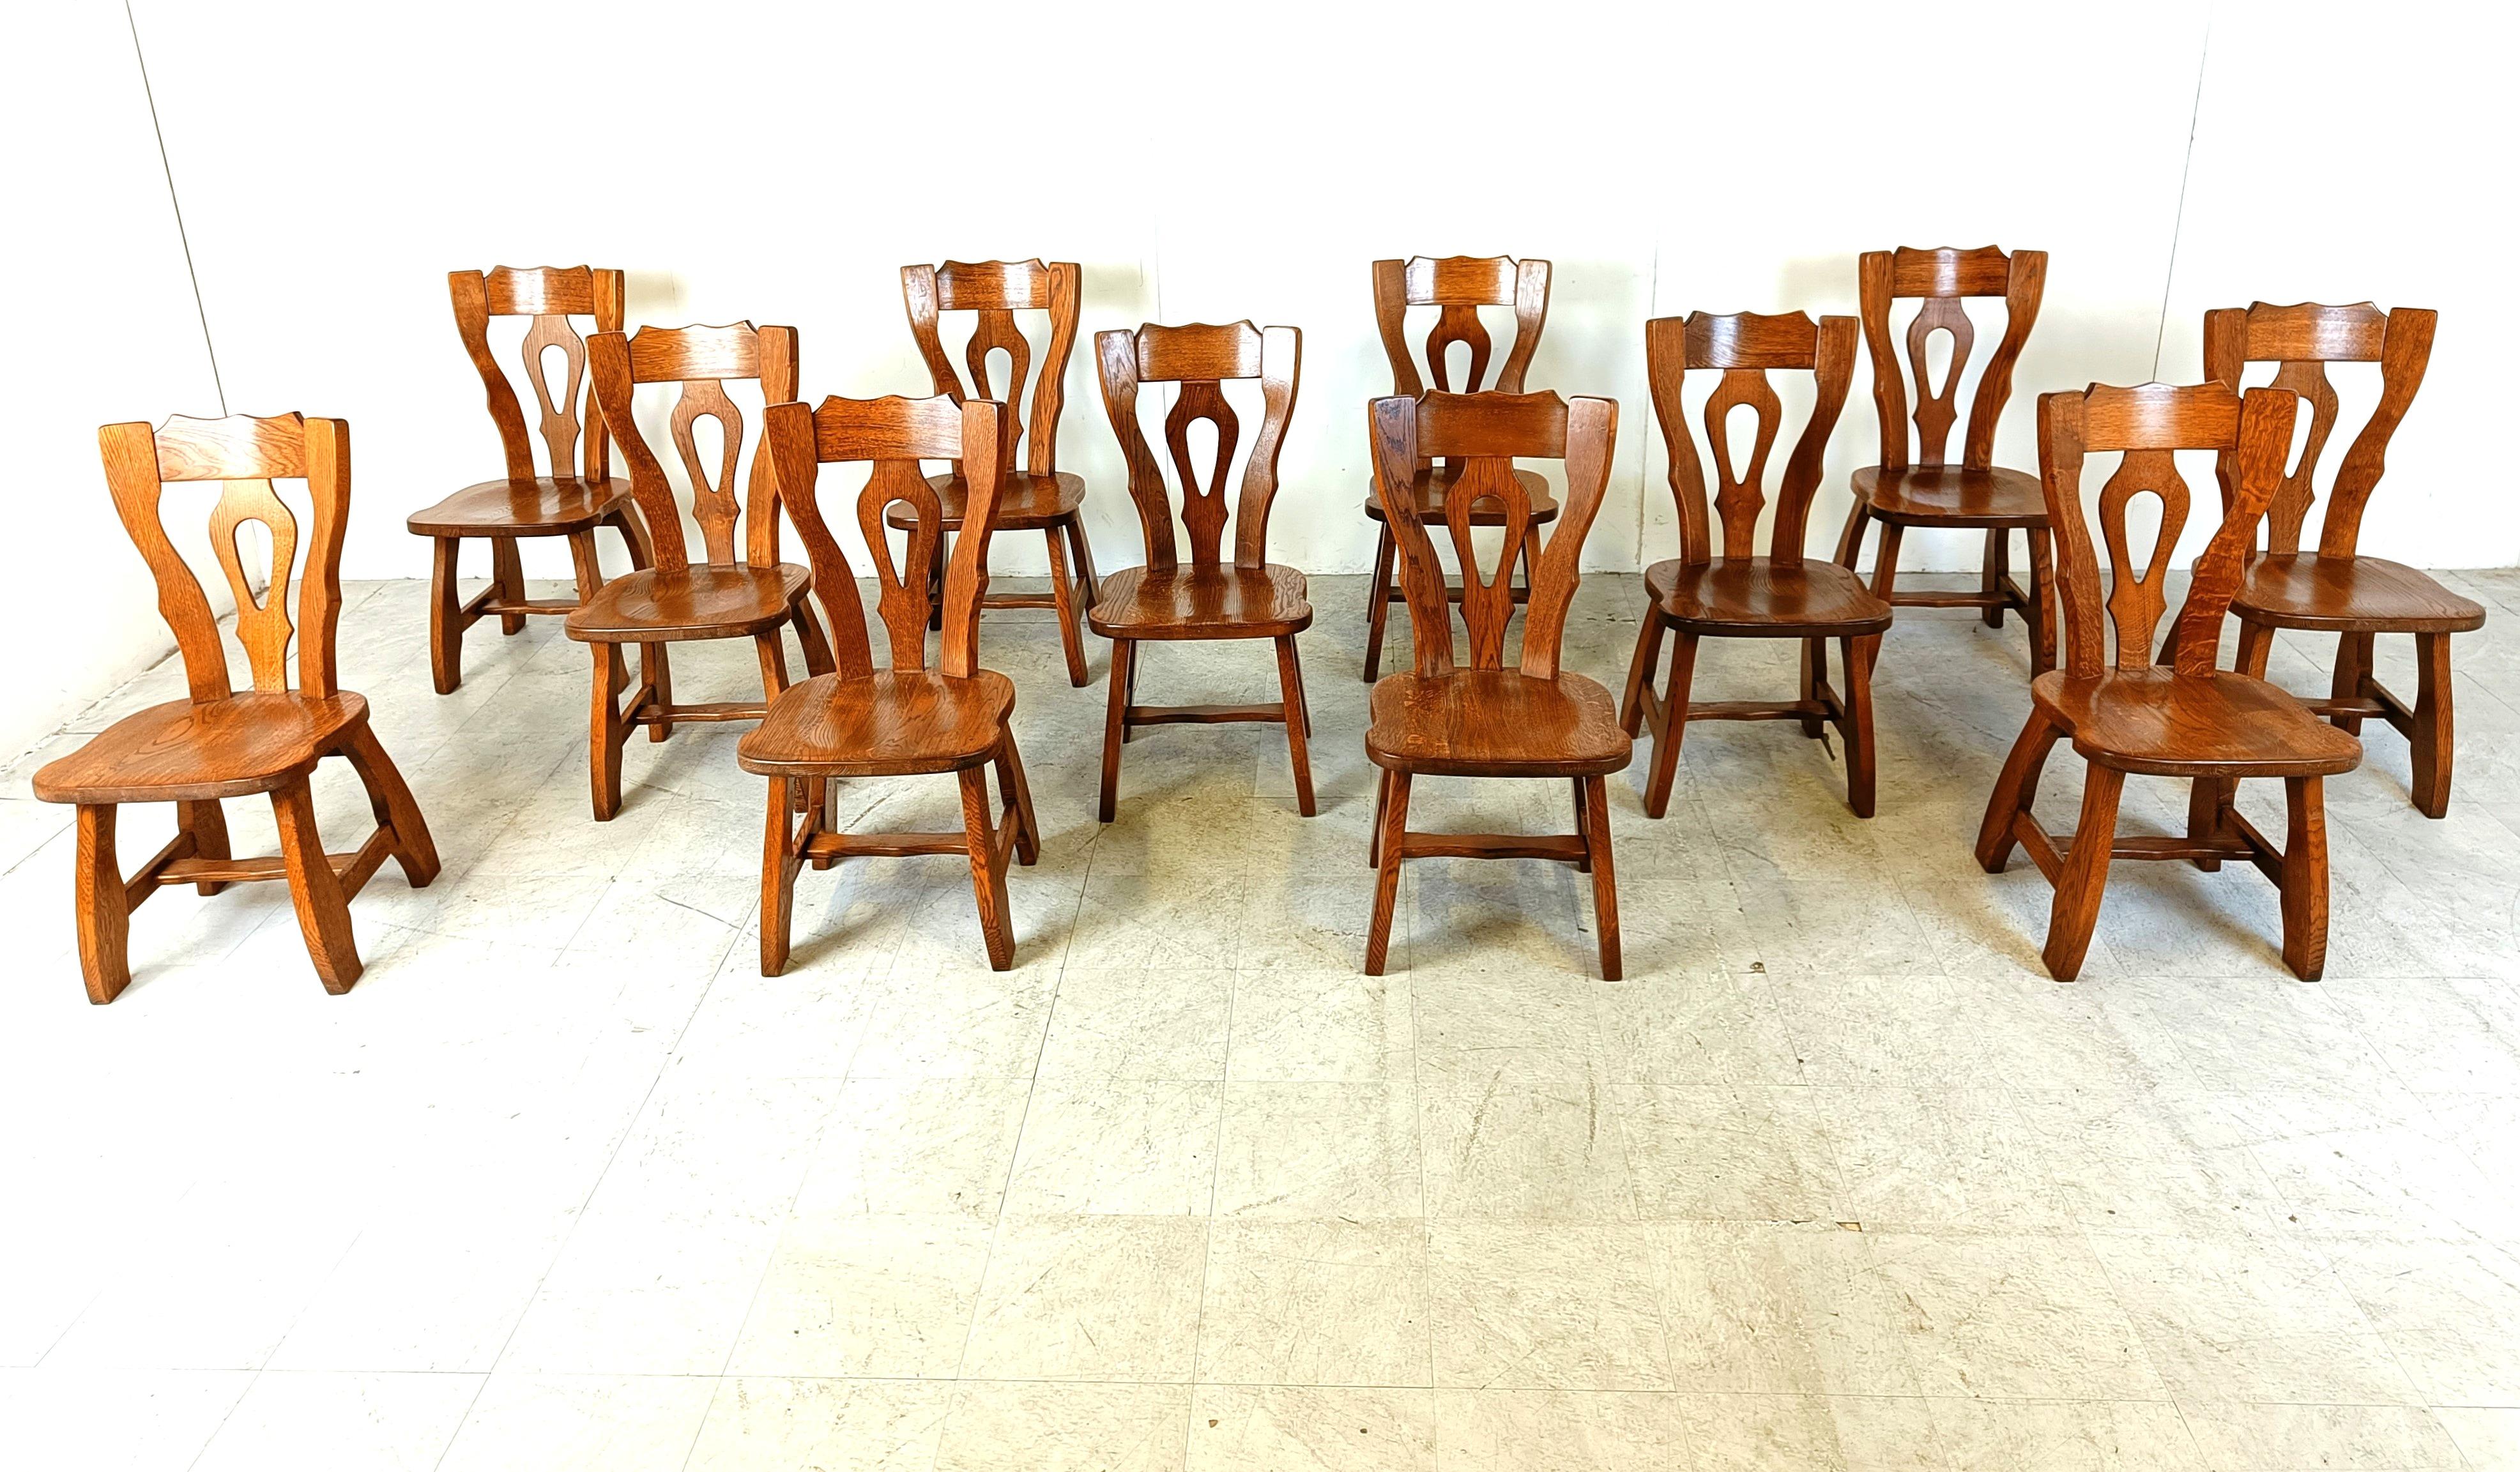 Mid century solid wooden  brutalist dining chairs, big set of 12 chairs

Nice rustic design.

Very sturdy chairs

Good original condition.

1960s - Germany

Dimensions:
Height: 94cm
Seat height: 45cm
Width: 45cm
Depth: 55cm

Ref.: 201044